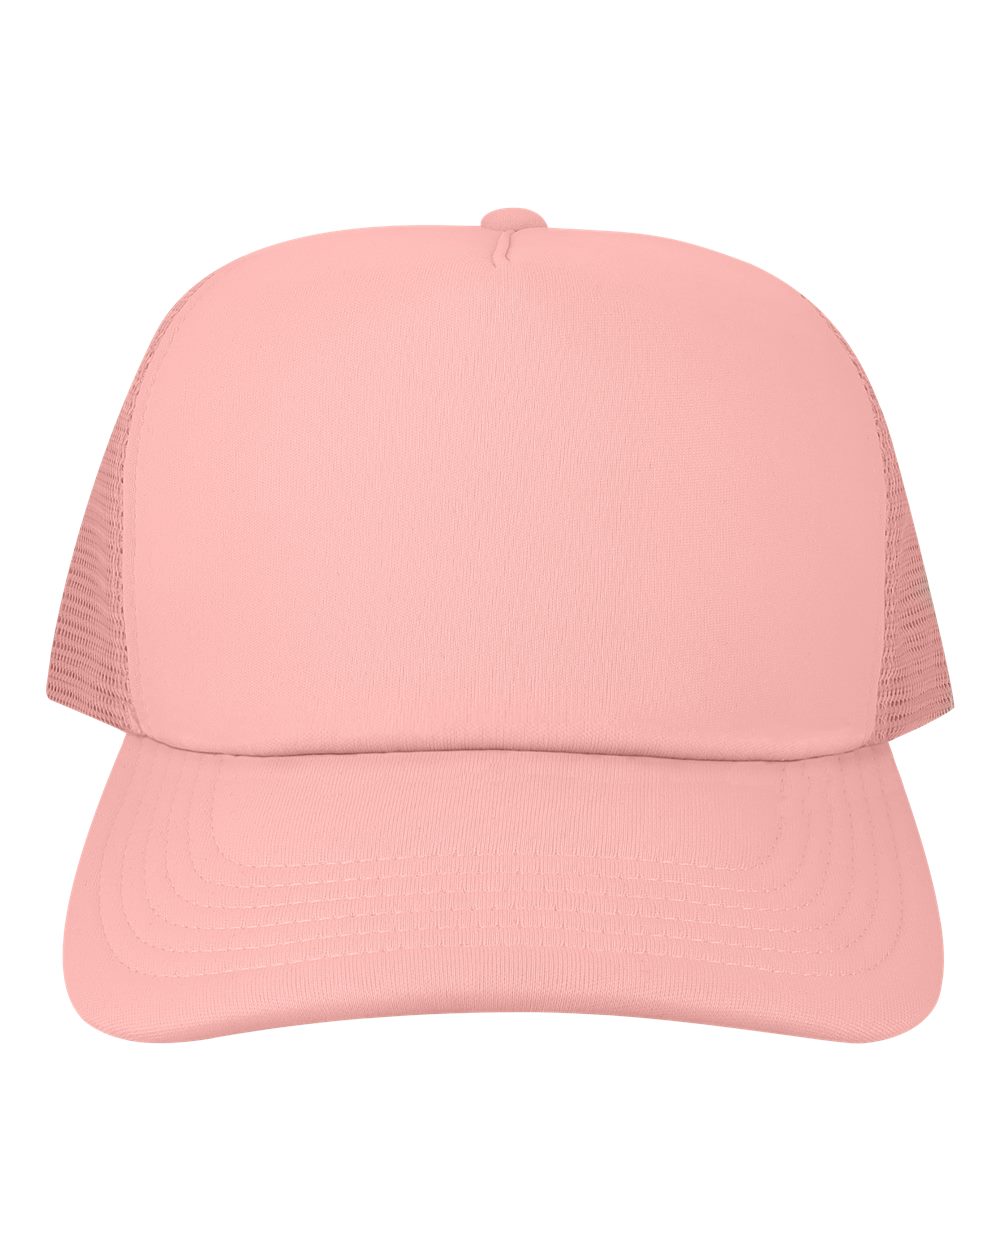 Dusty Rose Pink Trucker Hat with Coffee Embroidery